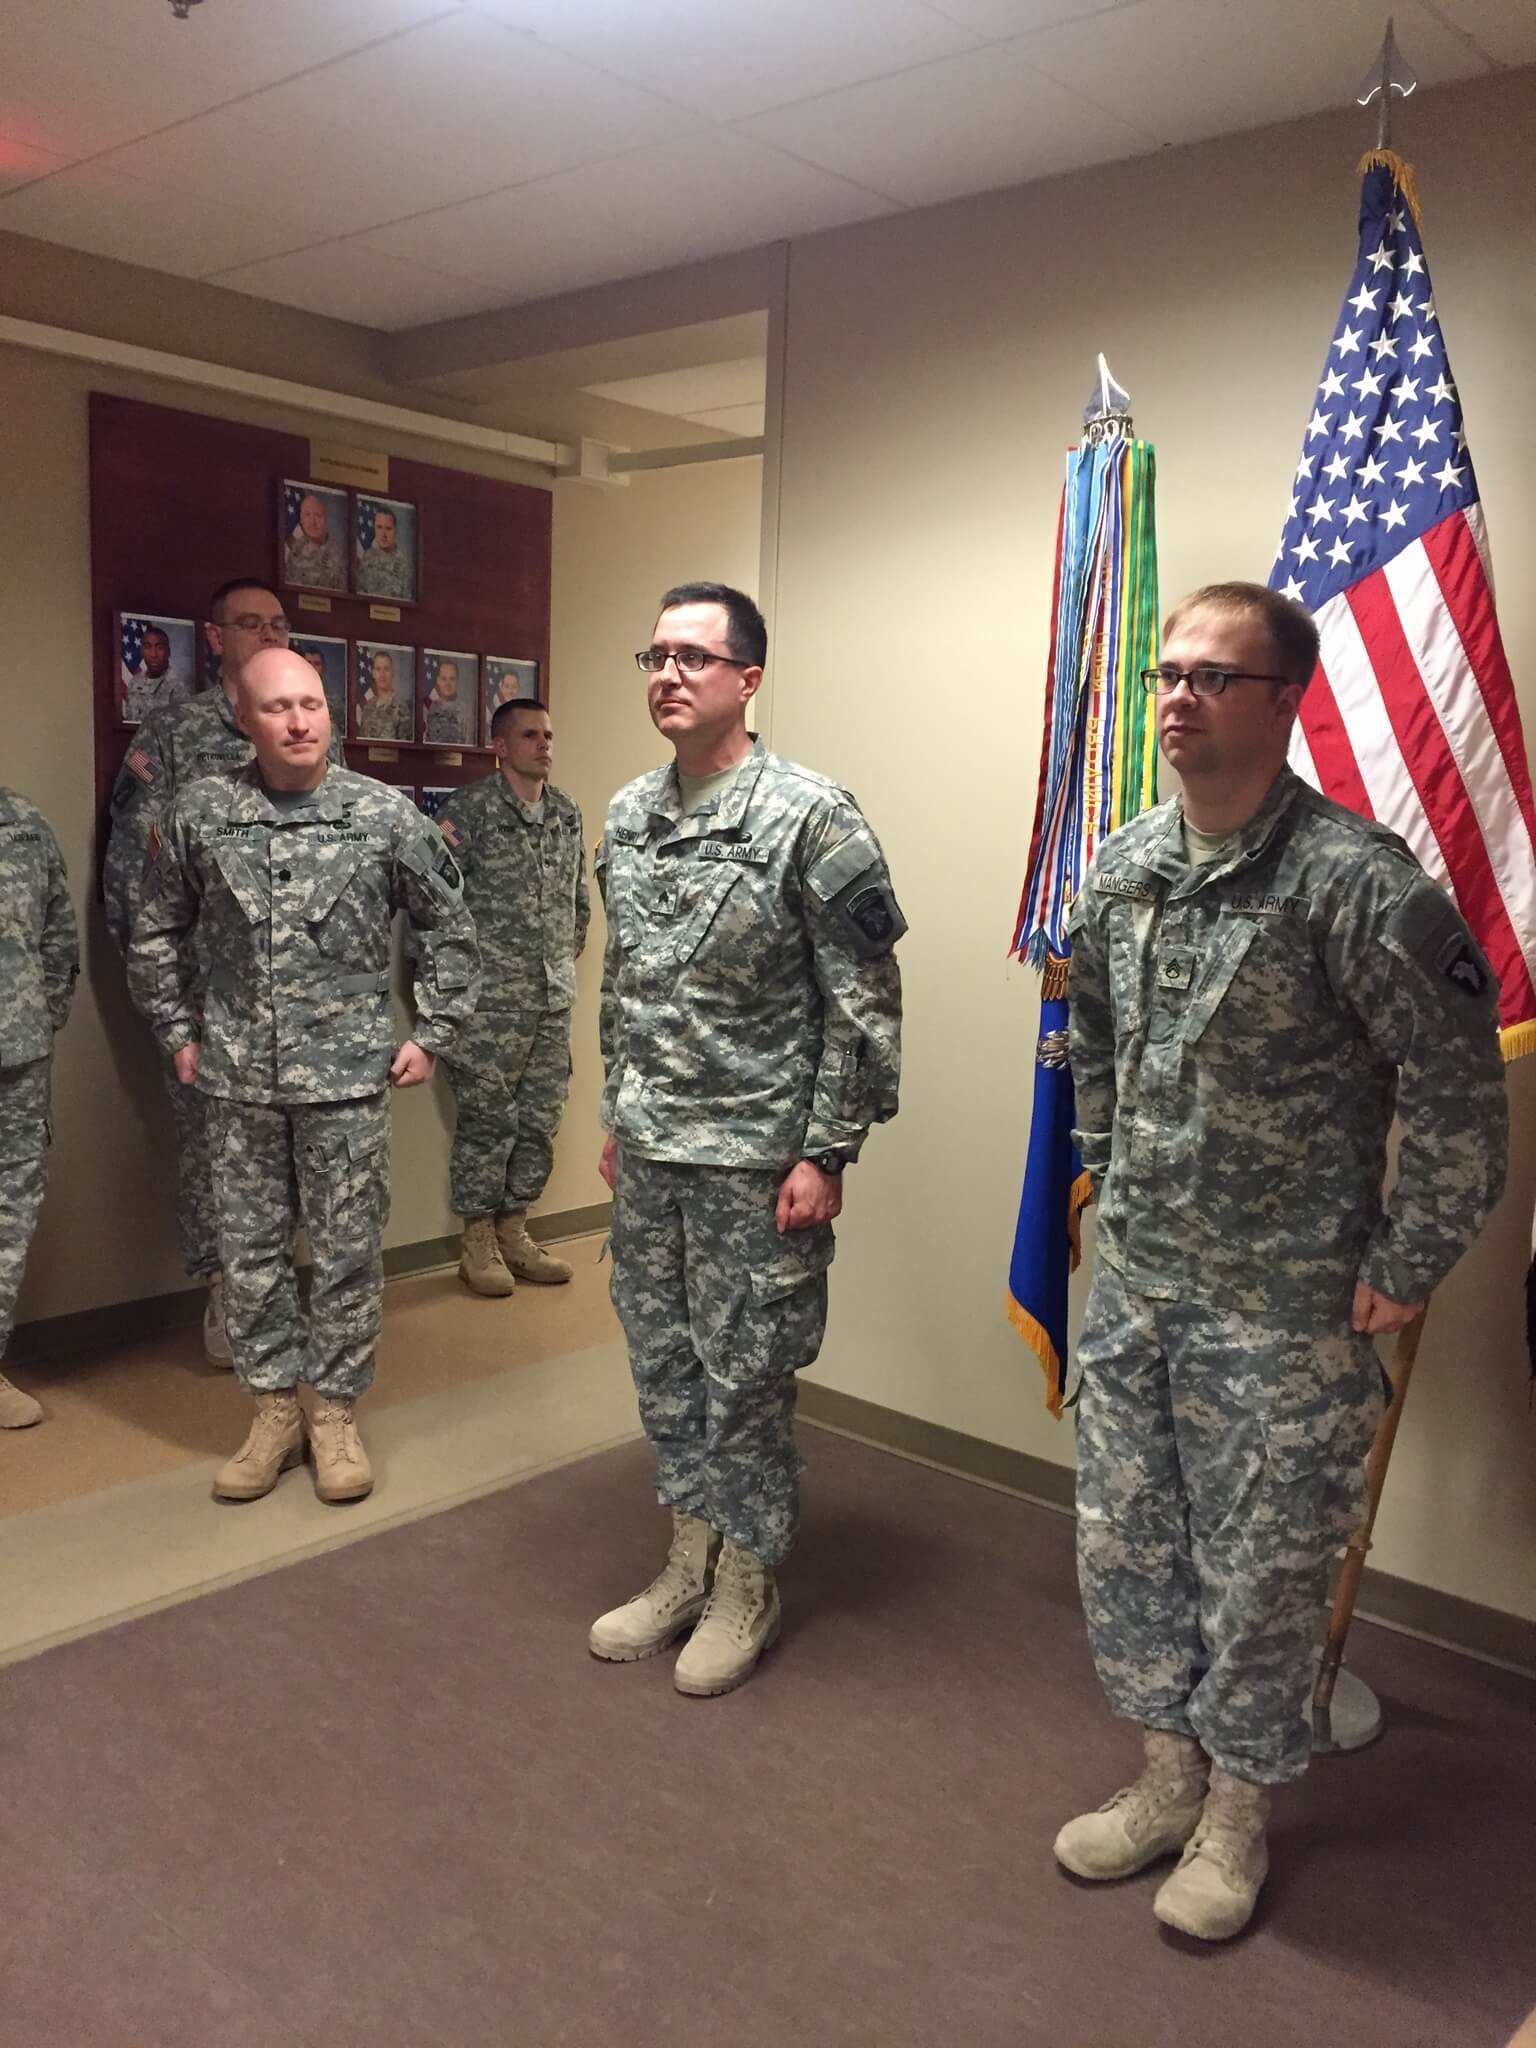 William’s promotion to SGT